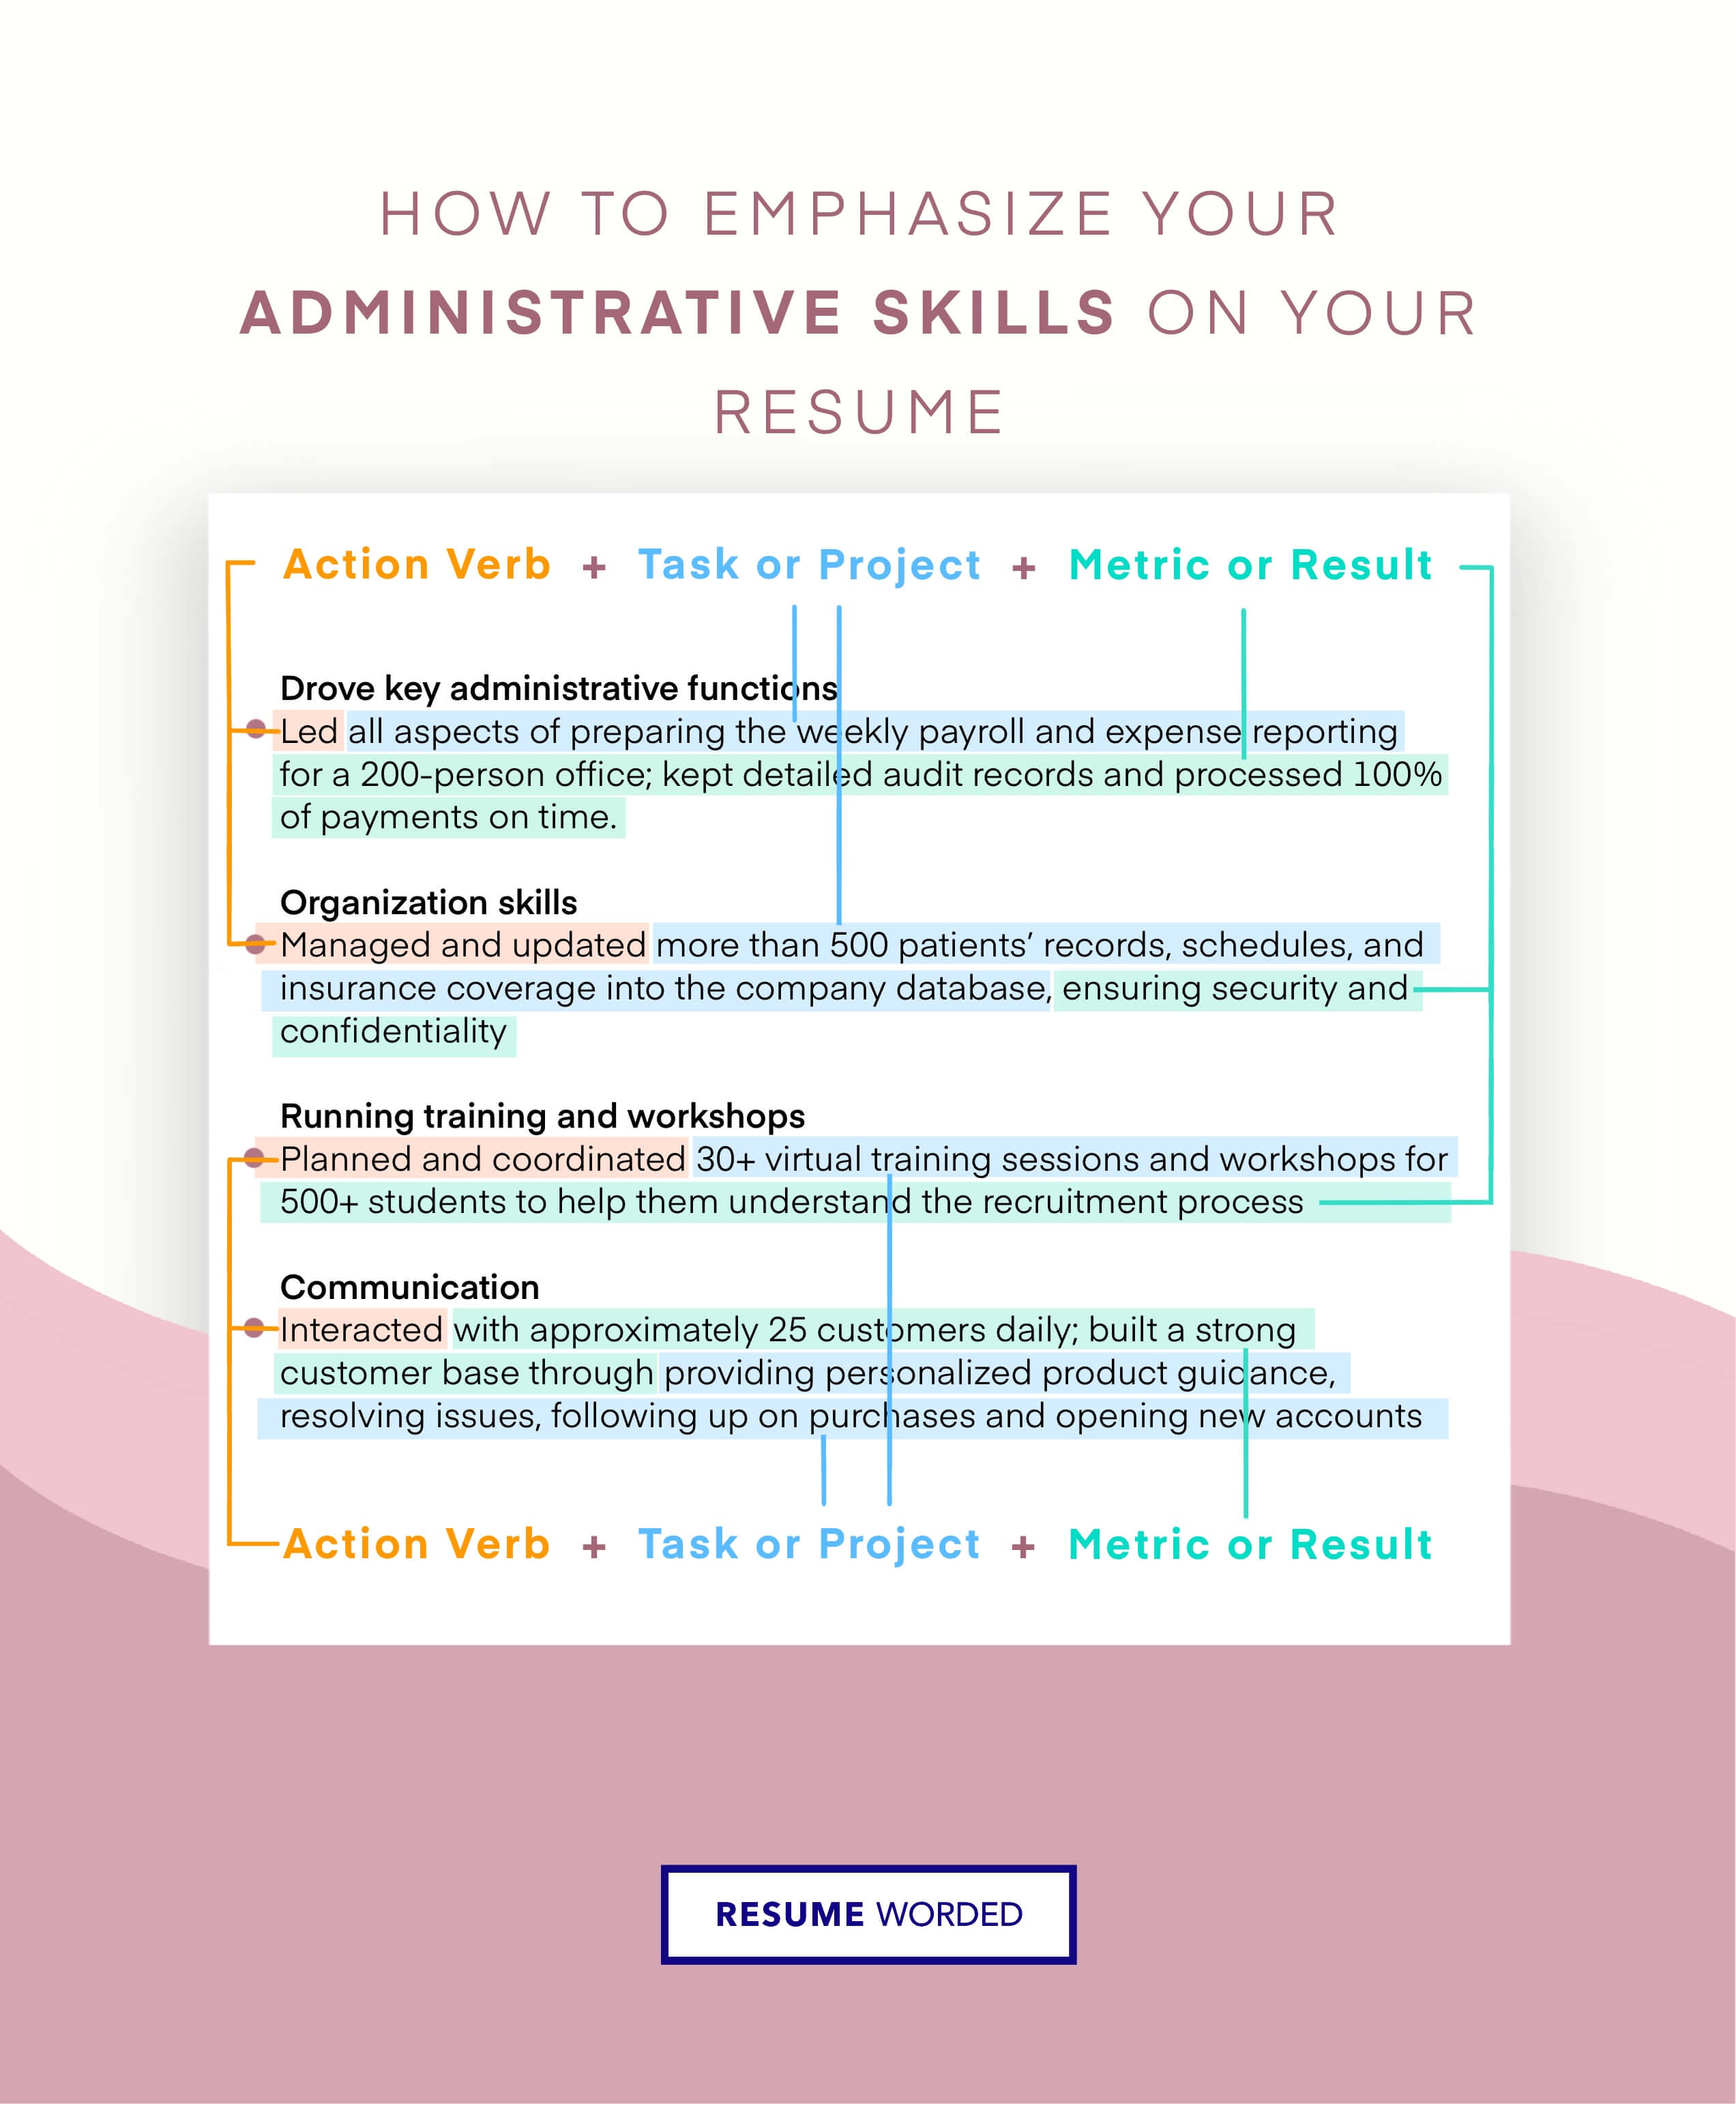 Have a focused system administration skill section. - Experienced System Administrator Resume